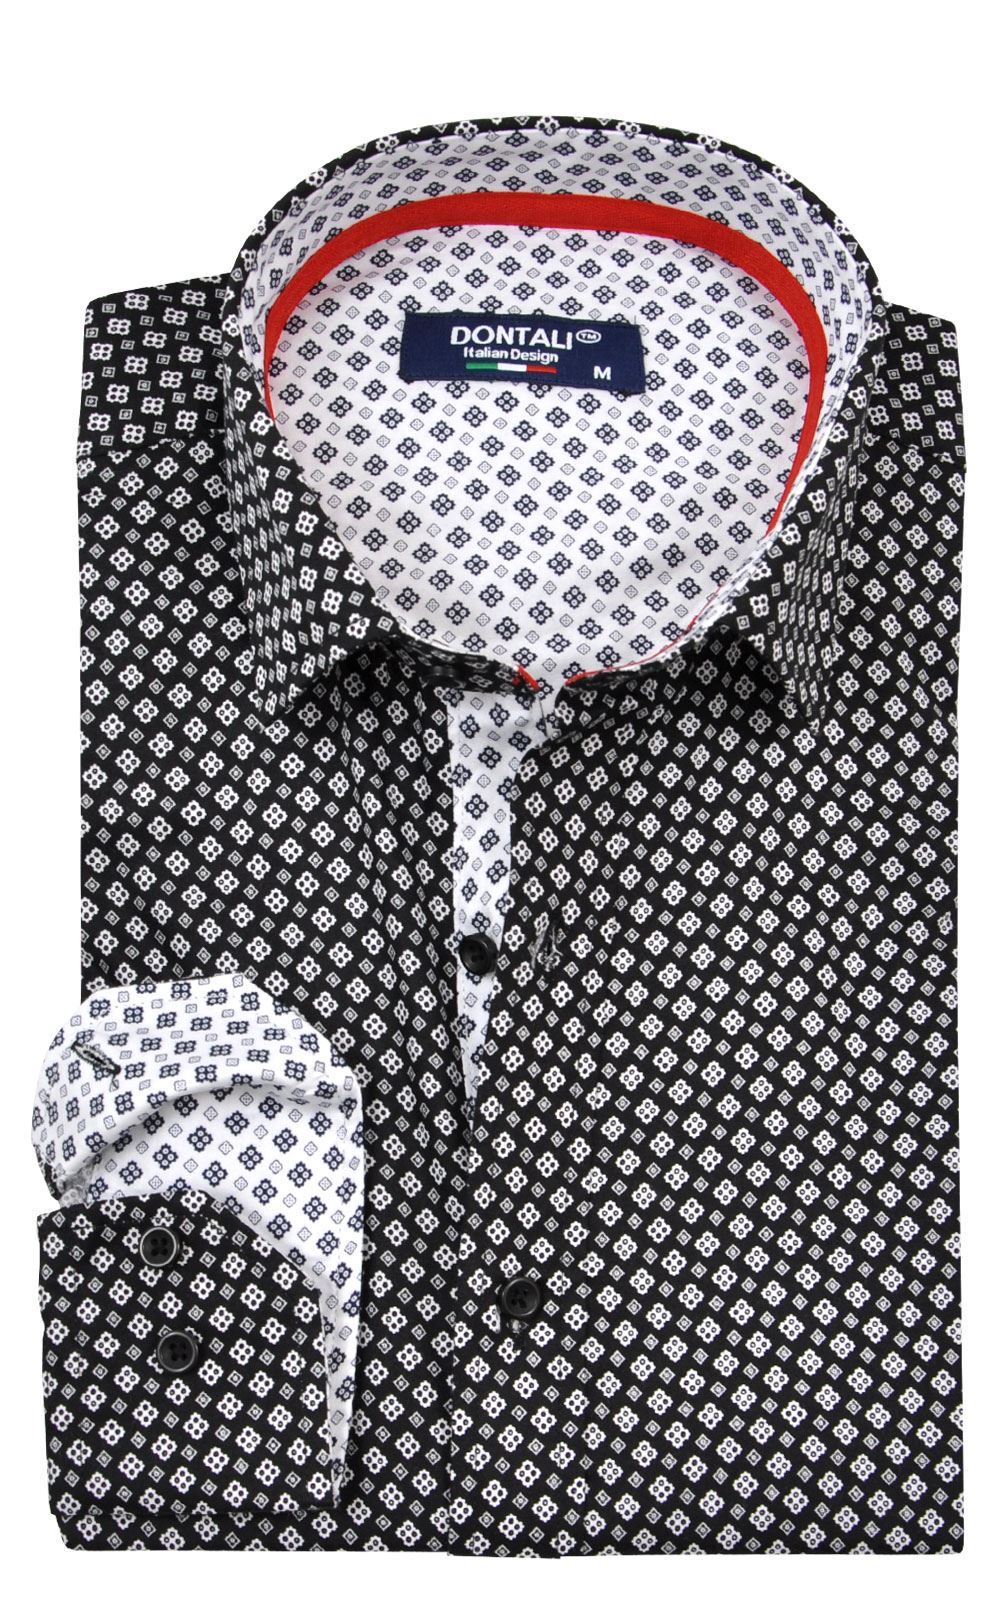 Picture of Dontali Long Sleeve Shirt DOPR101